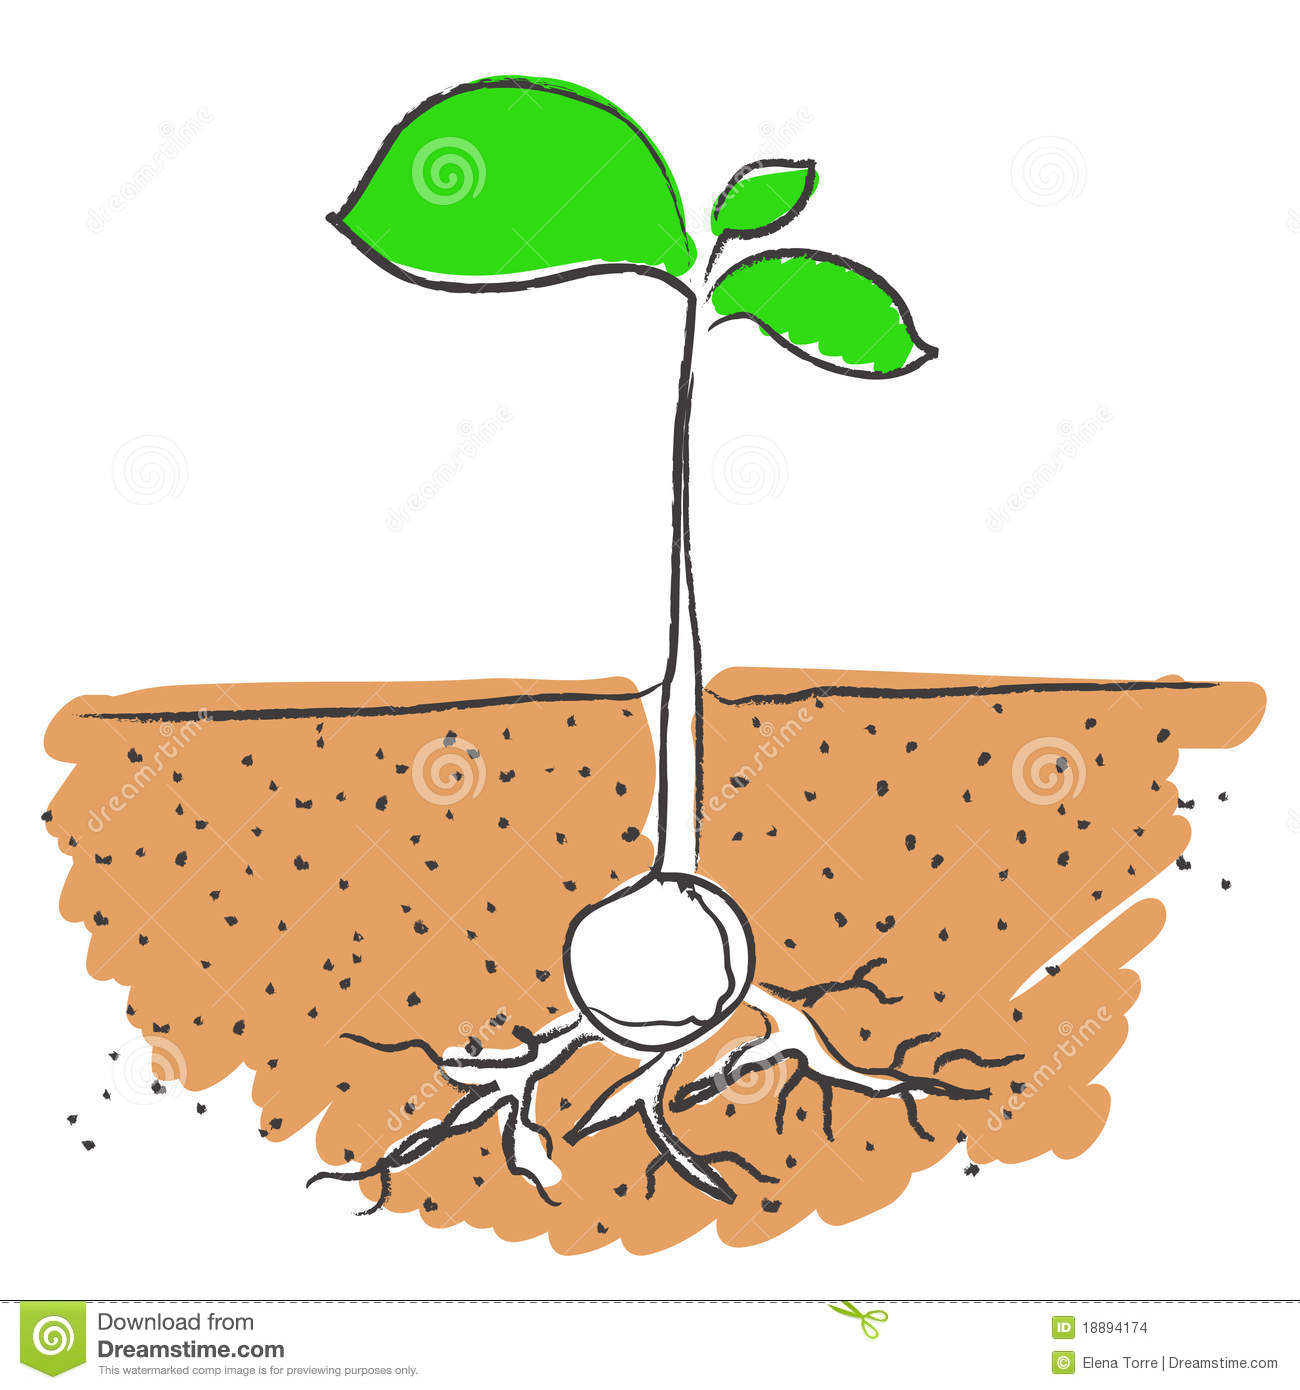 Illustration Of Seed Growing With Roots In Soil Isolated On White